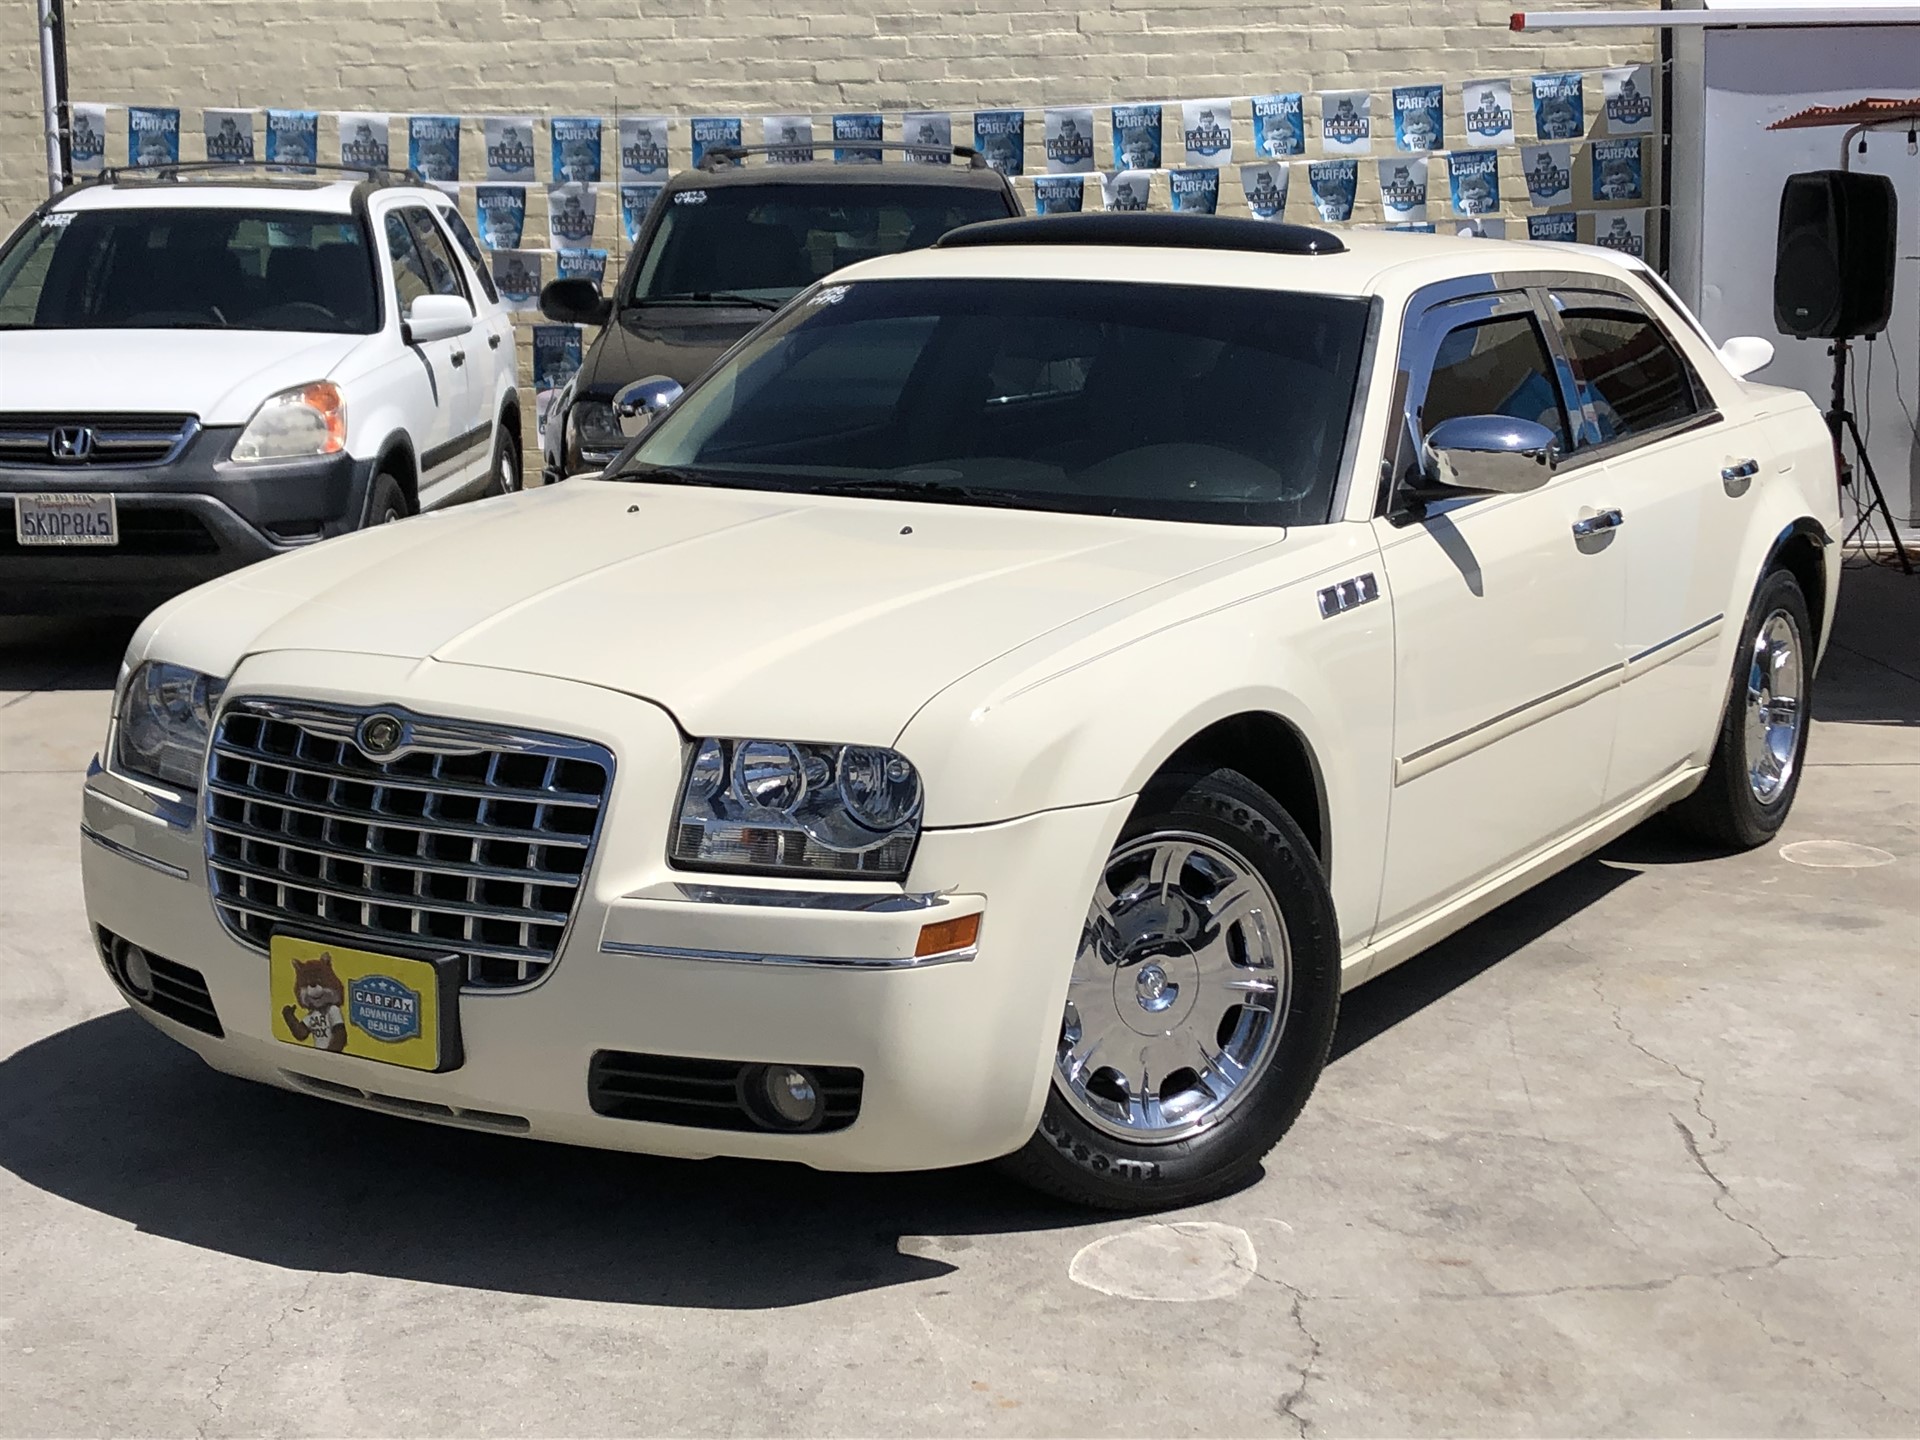 2006 Chrysler 300 Touring Limited - Low Miles! Leather! Navigation! Premium Sound!